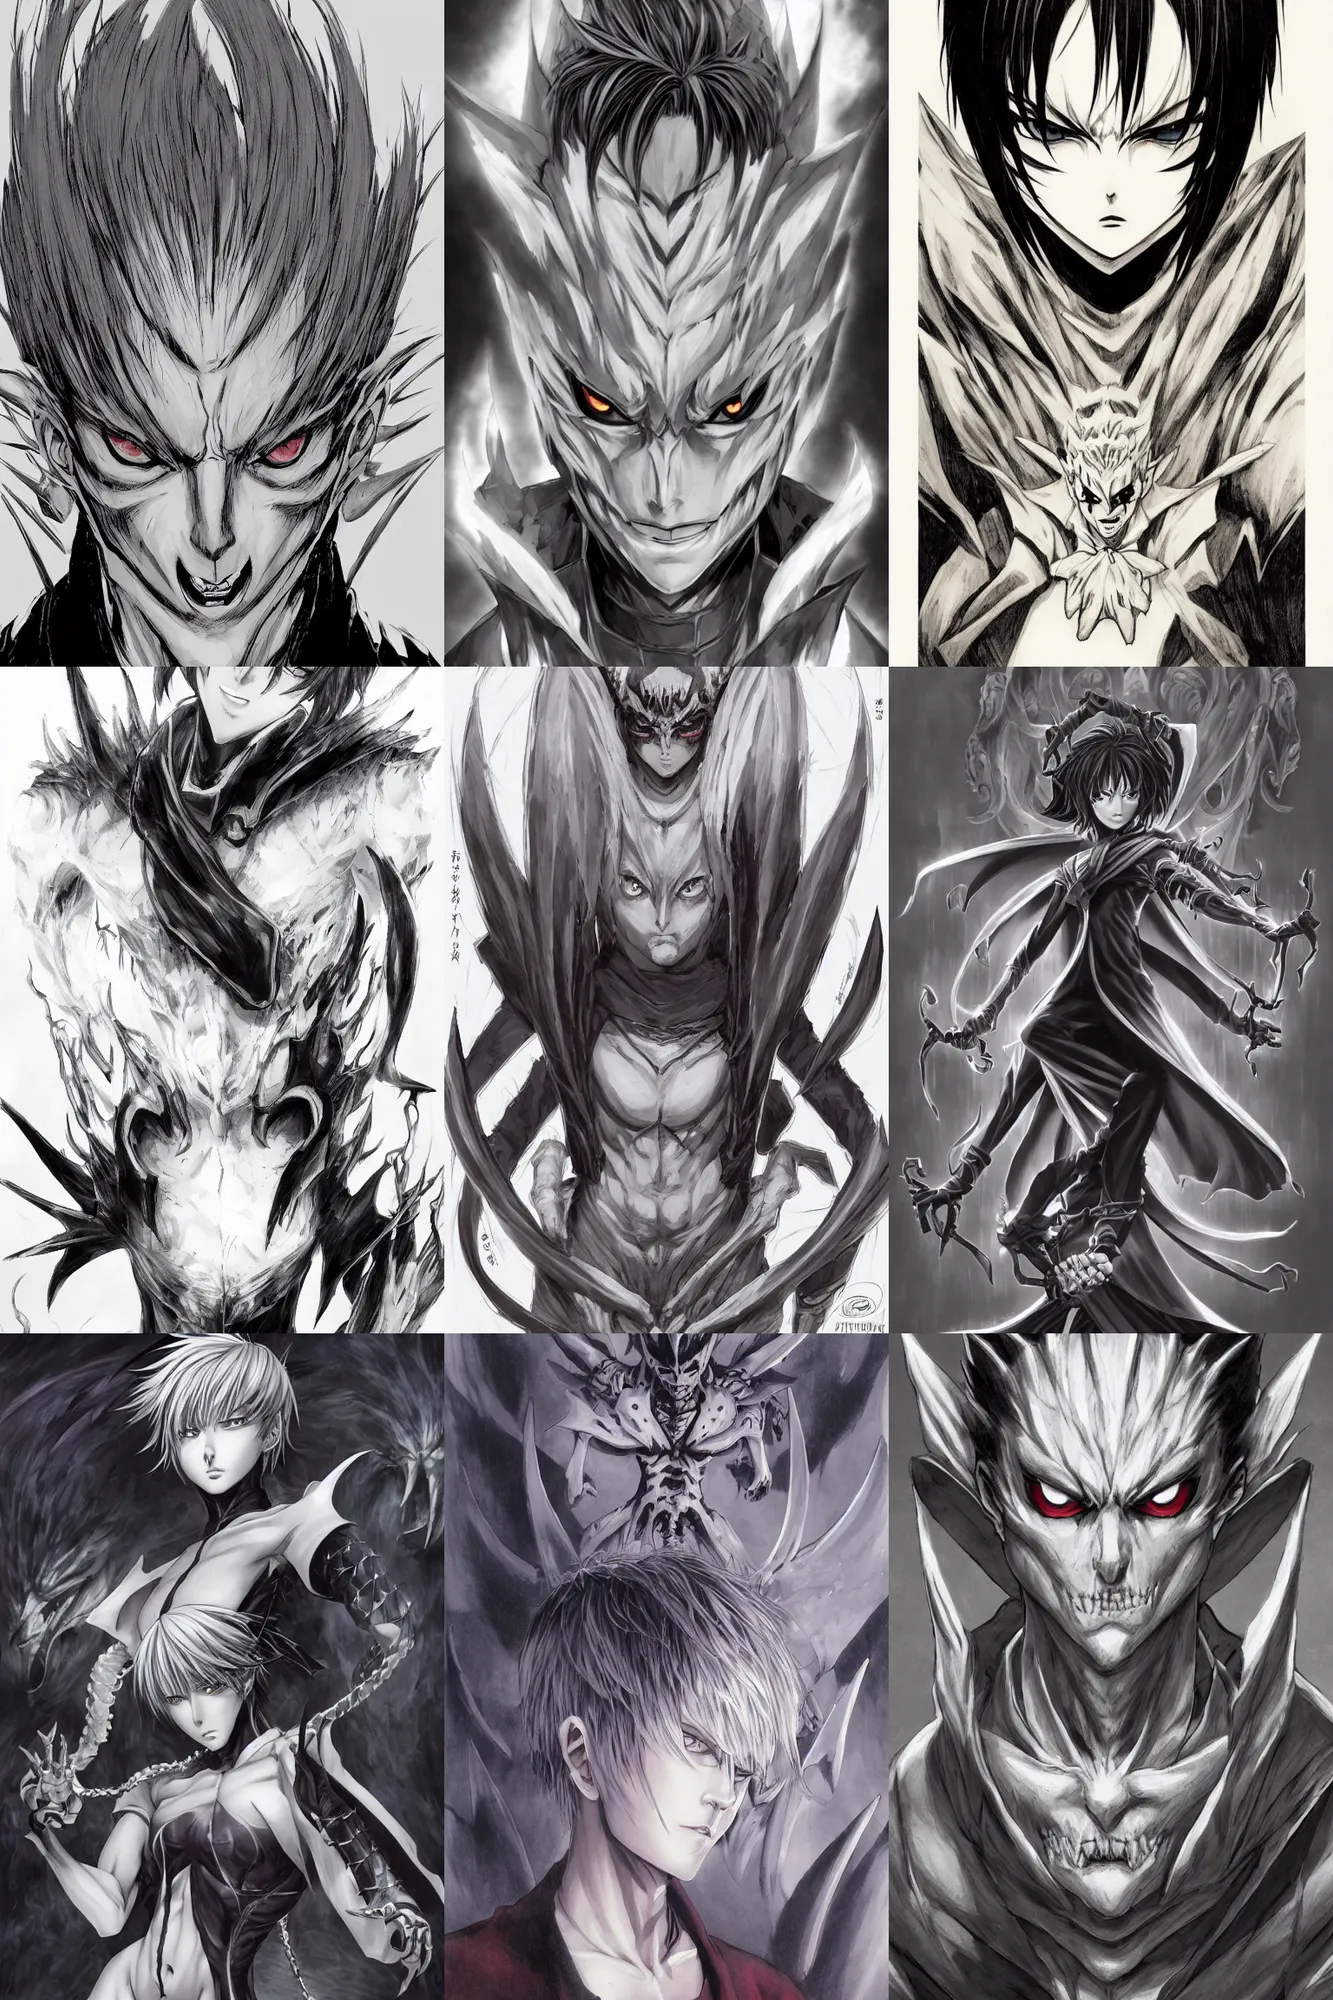 Prompt: demon necromancer , short hair, made by Yusuke Murata, Tomohiro Shimoguchi, Takeshi Obata, Tite Kubo, ArtStation, CGSociety, direct gaze, beautiful face, sharp fine-face, pretty face, realistic shaded Perfect face, fine details,perfect composition body, symmetrical face,symmetrical eyes, pencil art on paper